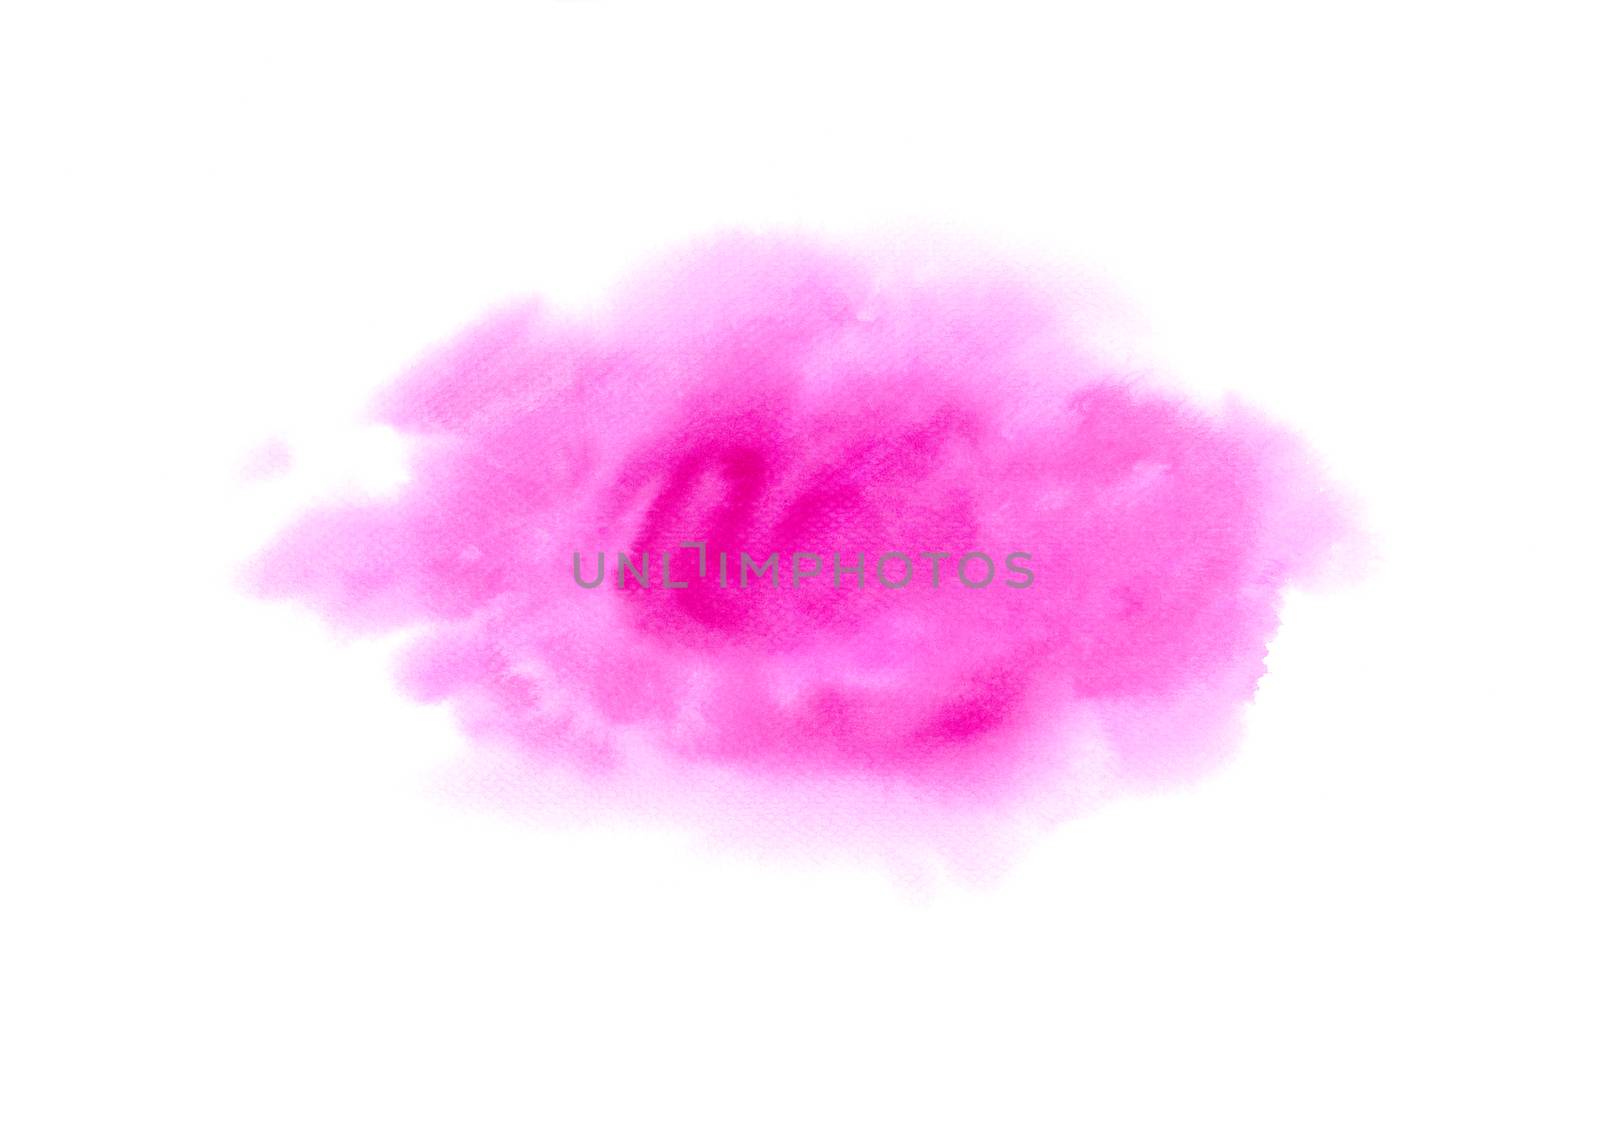 Romantic sweet charming pink abstract background. Watercolor hand painting illustration. Design element for wallpaper, packaging, banner, poster, flyer.